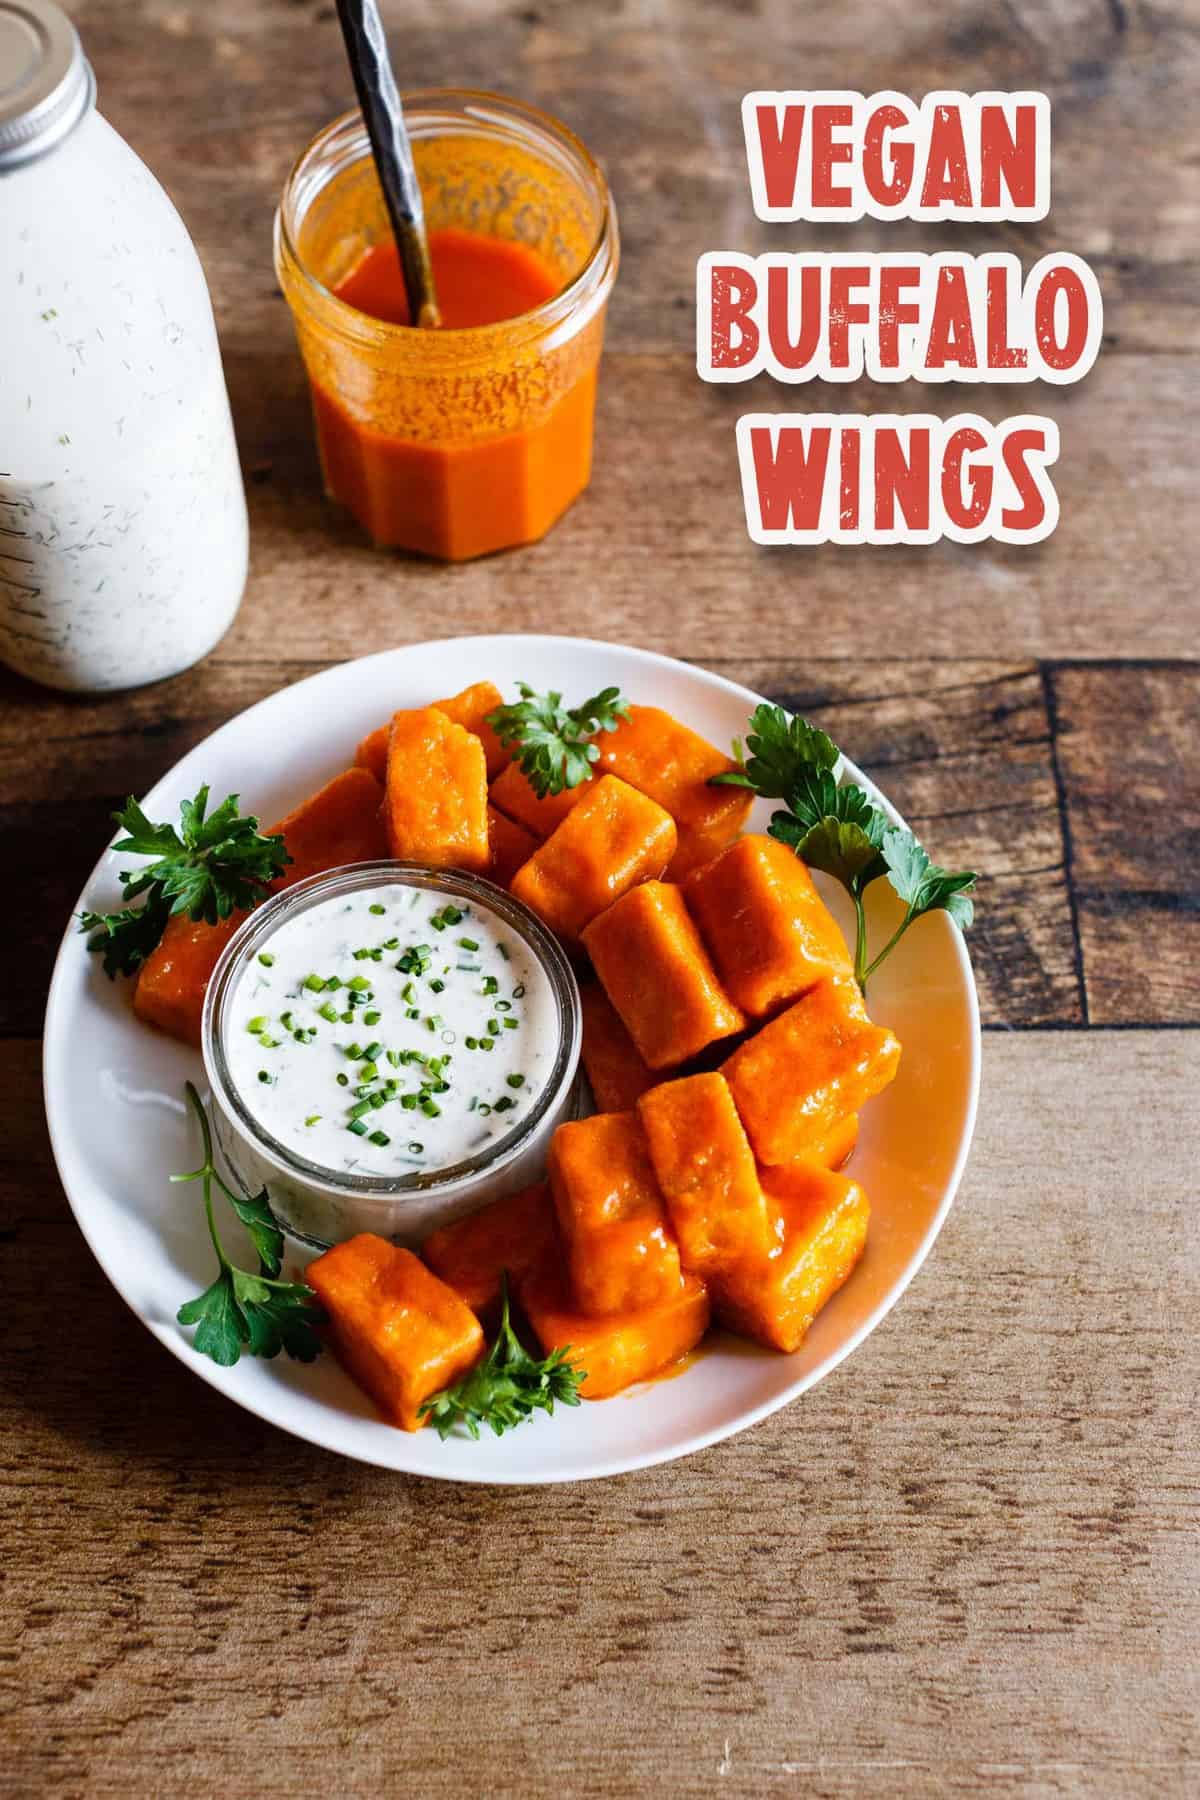 Overhead view of Vegan Spicy Buffalo Tofu "Wings" with homemade Vegan Ranch Dressing on a dark wood background and text overlay reading "Vegan Buffalo Wings"